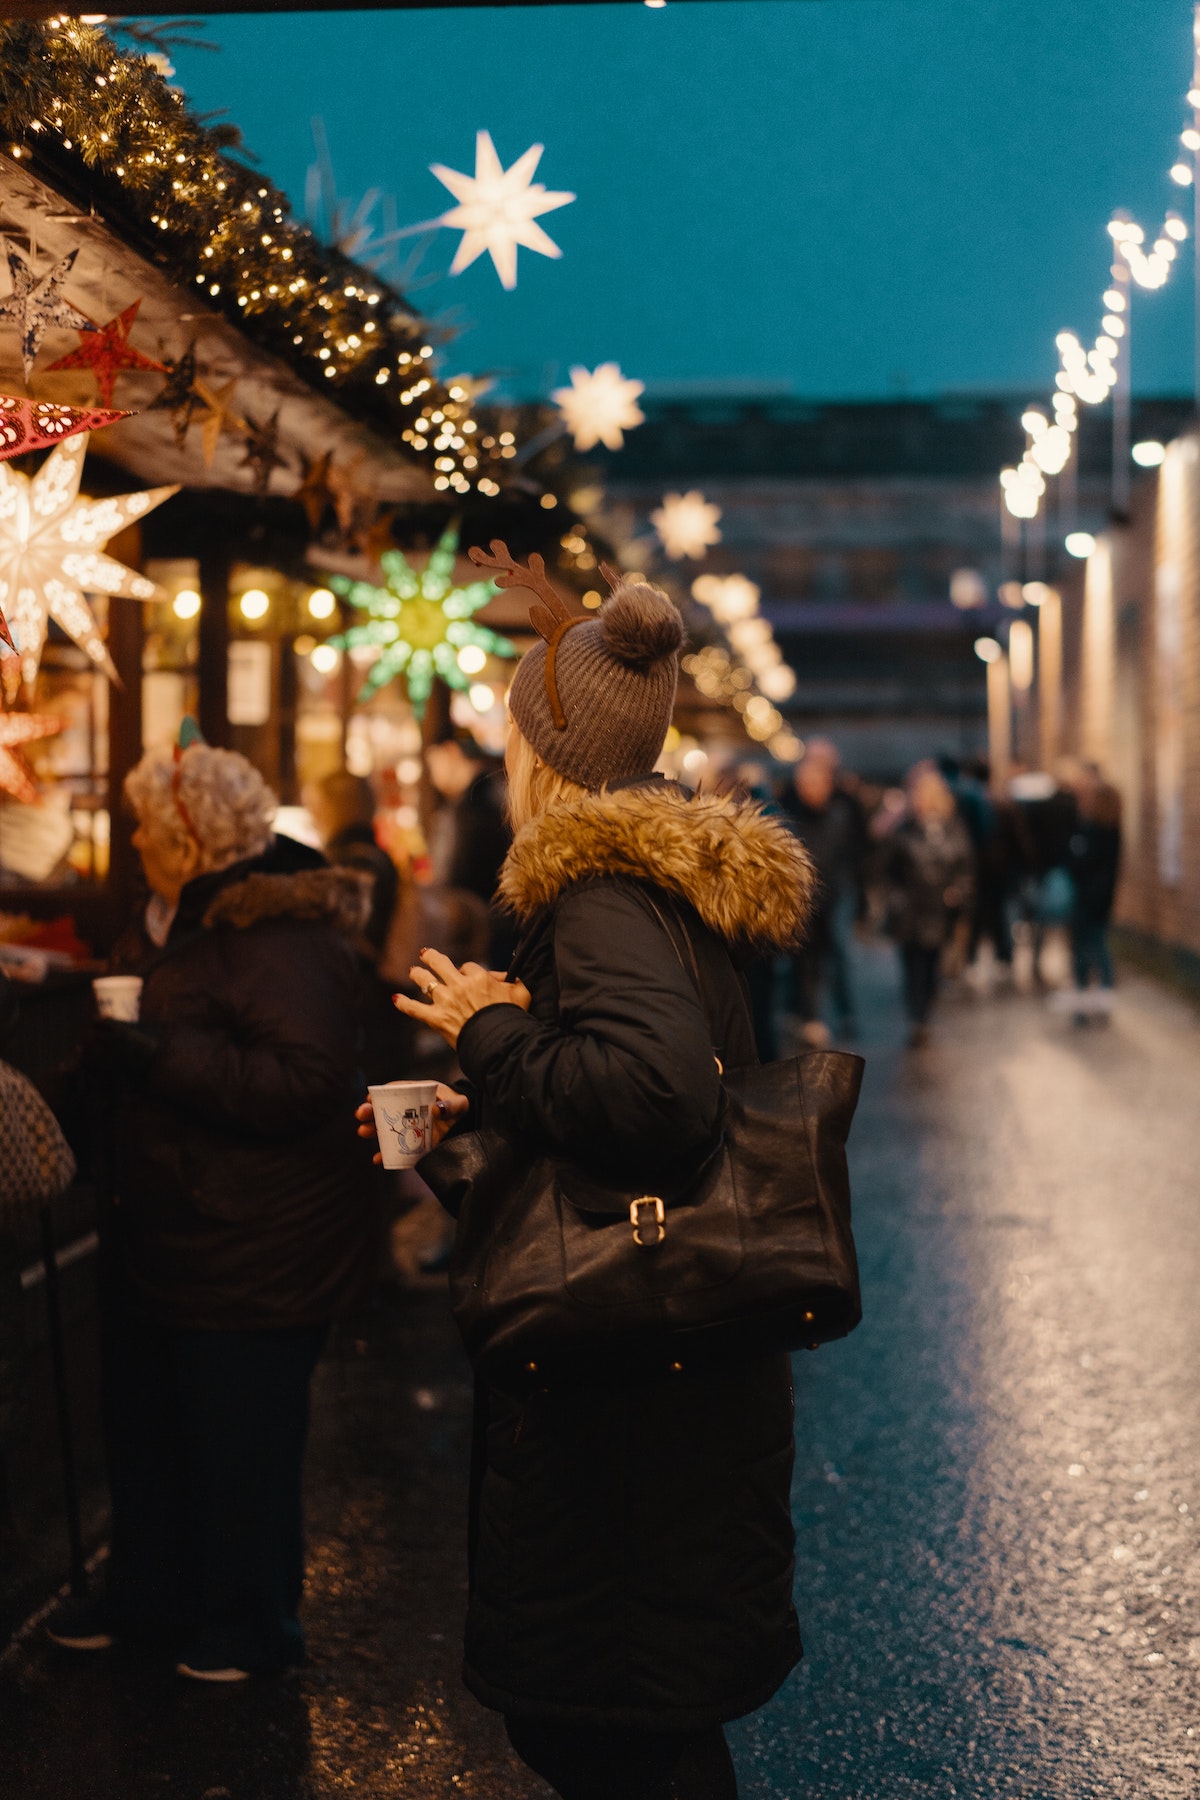 Woman browsing the stalls at a brightly lit Christmas market.